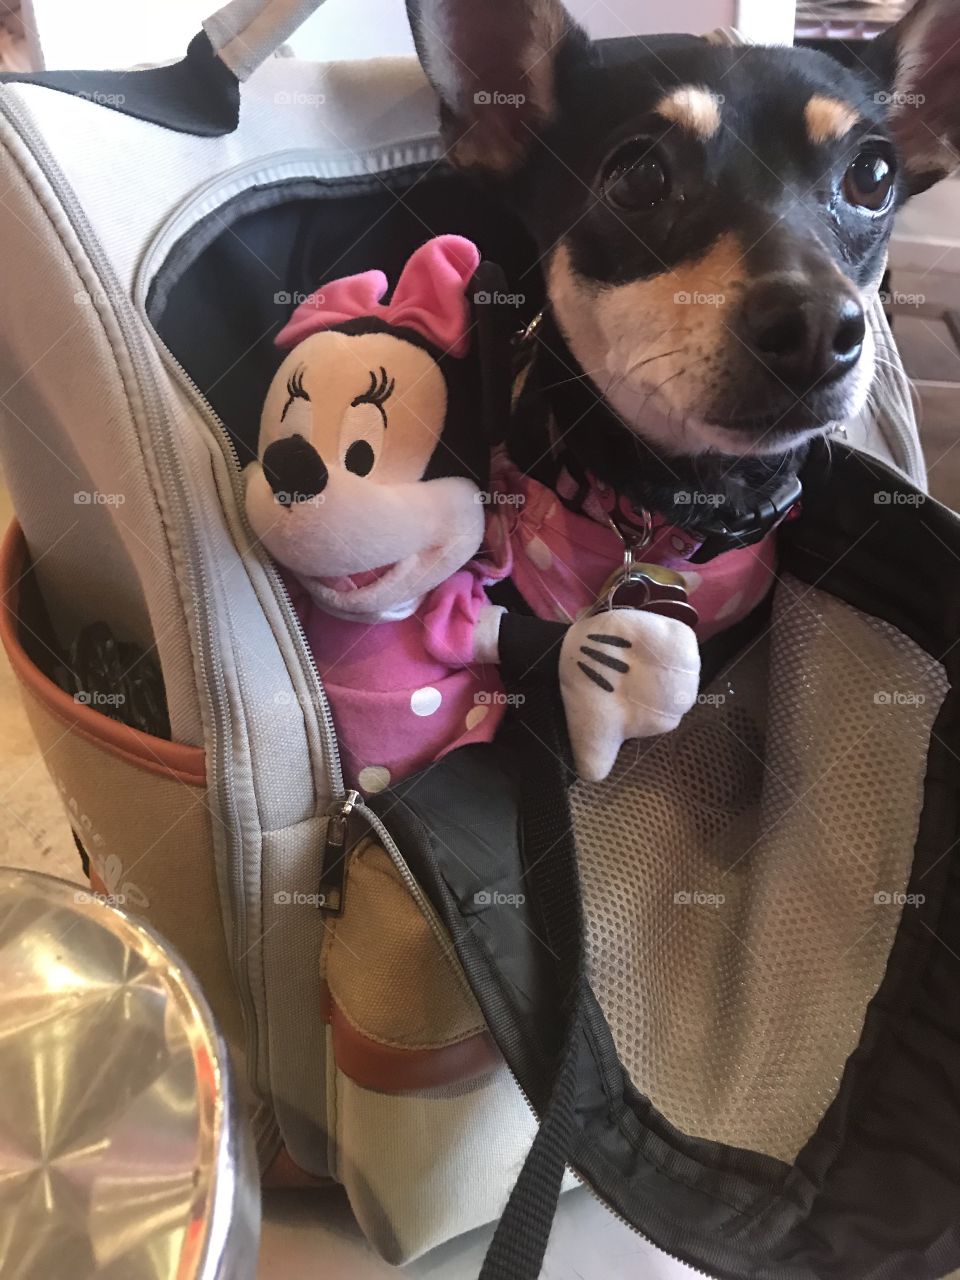 Which is the real Minnie?